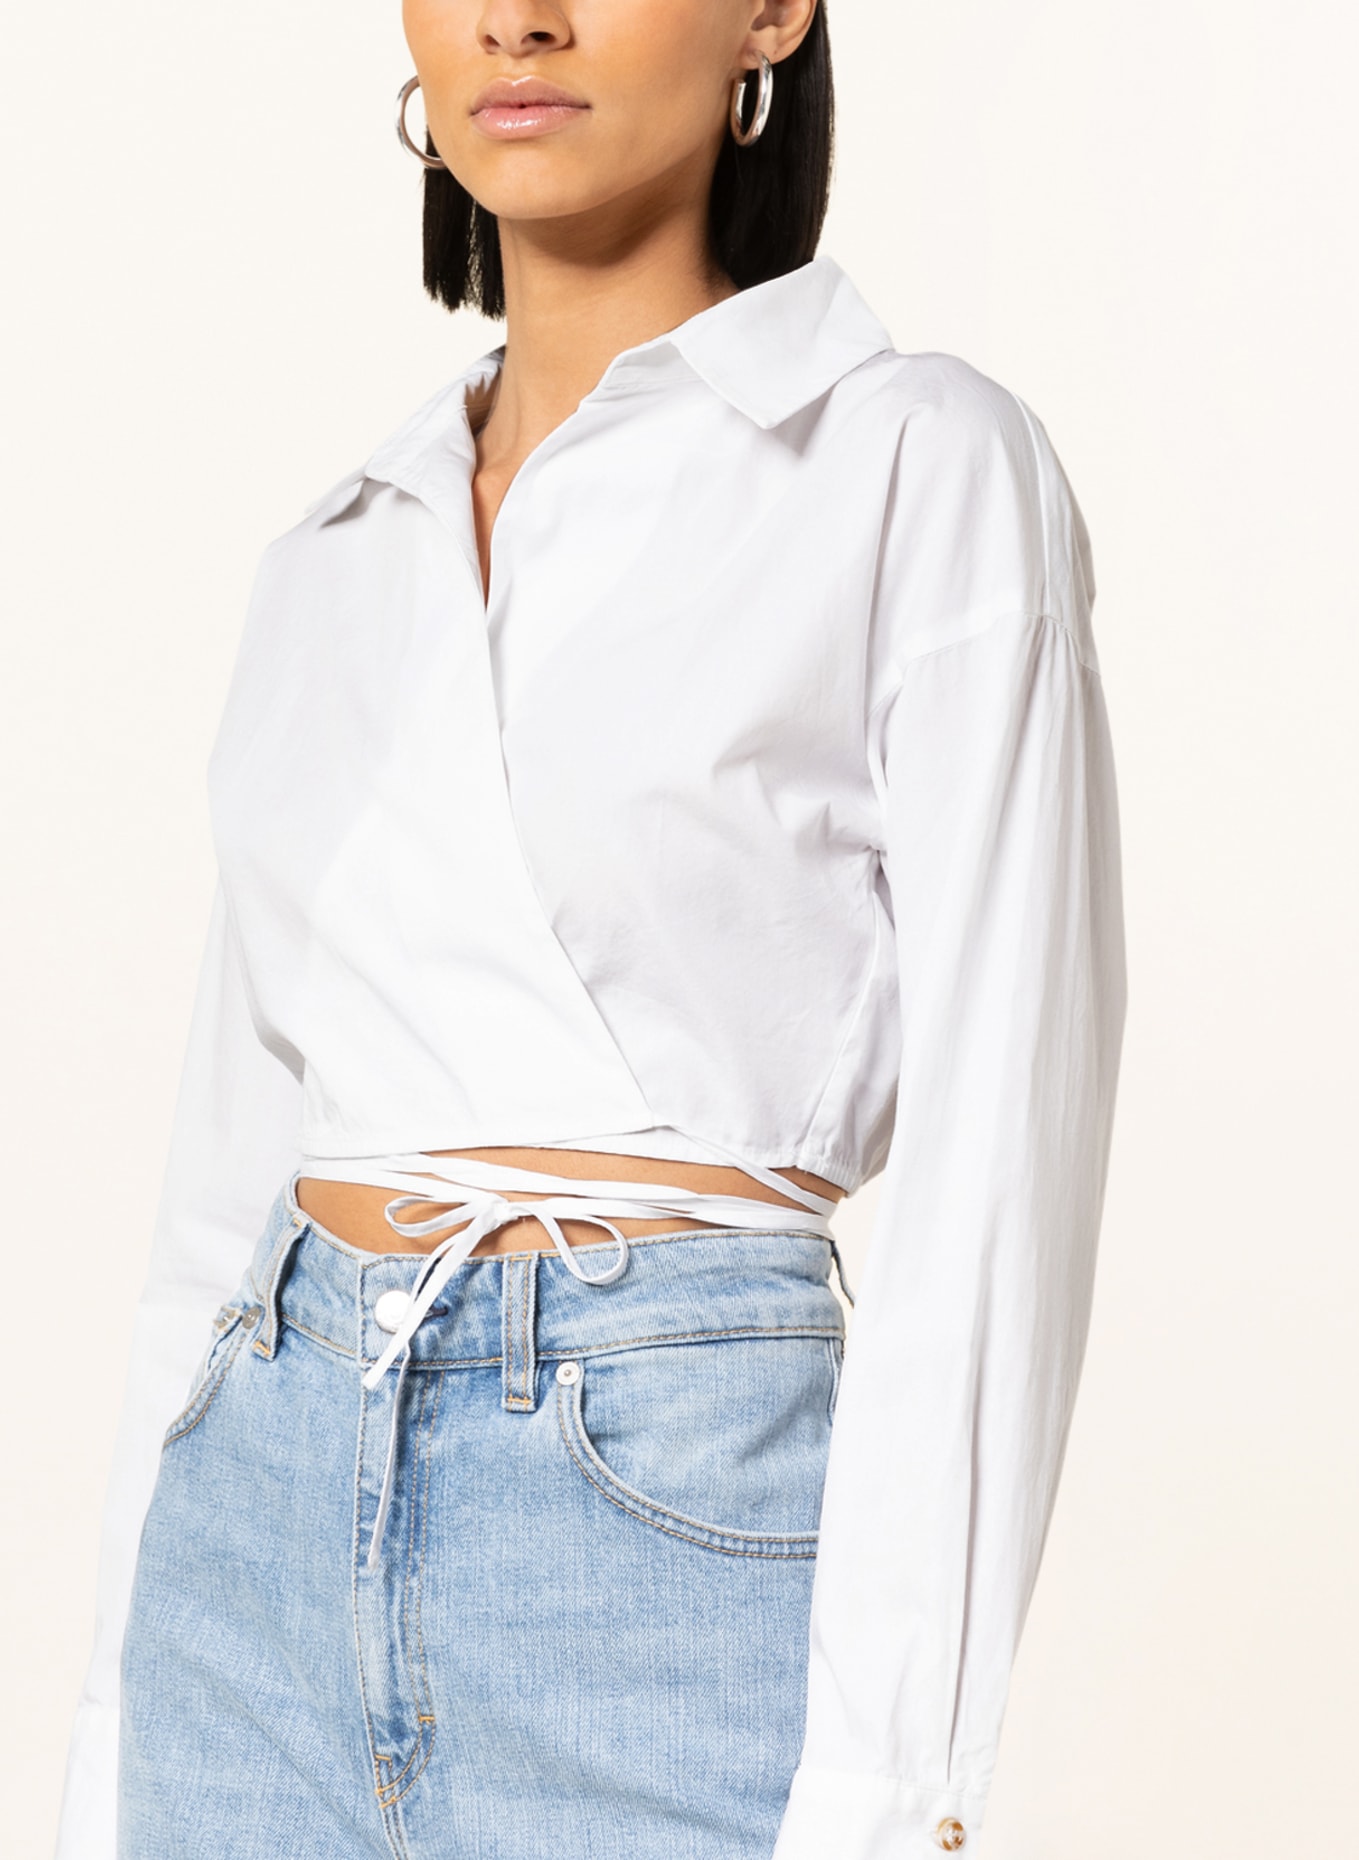 ENVII weiss in ENLORI Cropped-Bluse